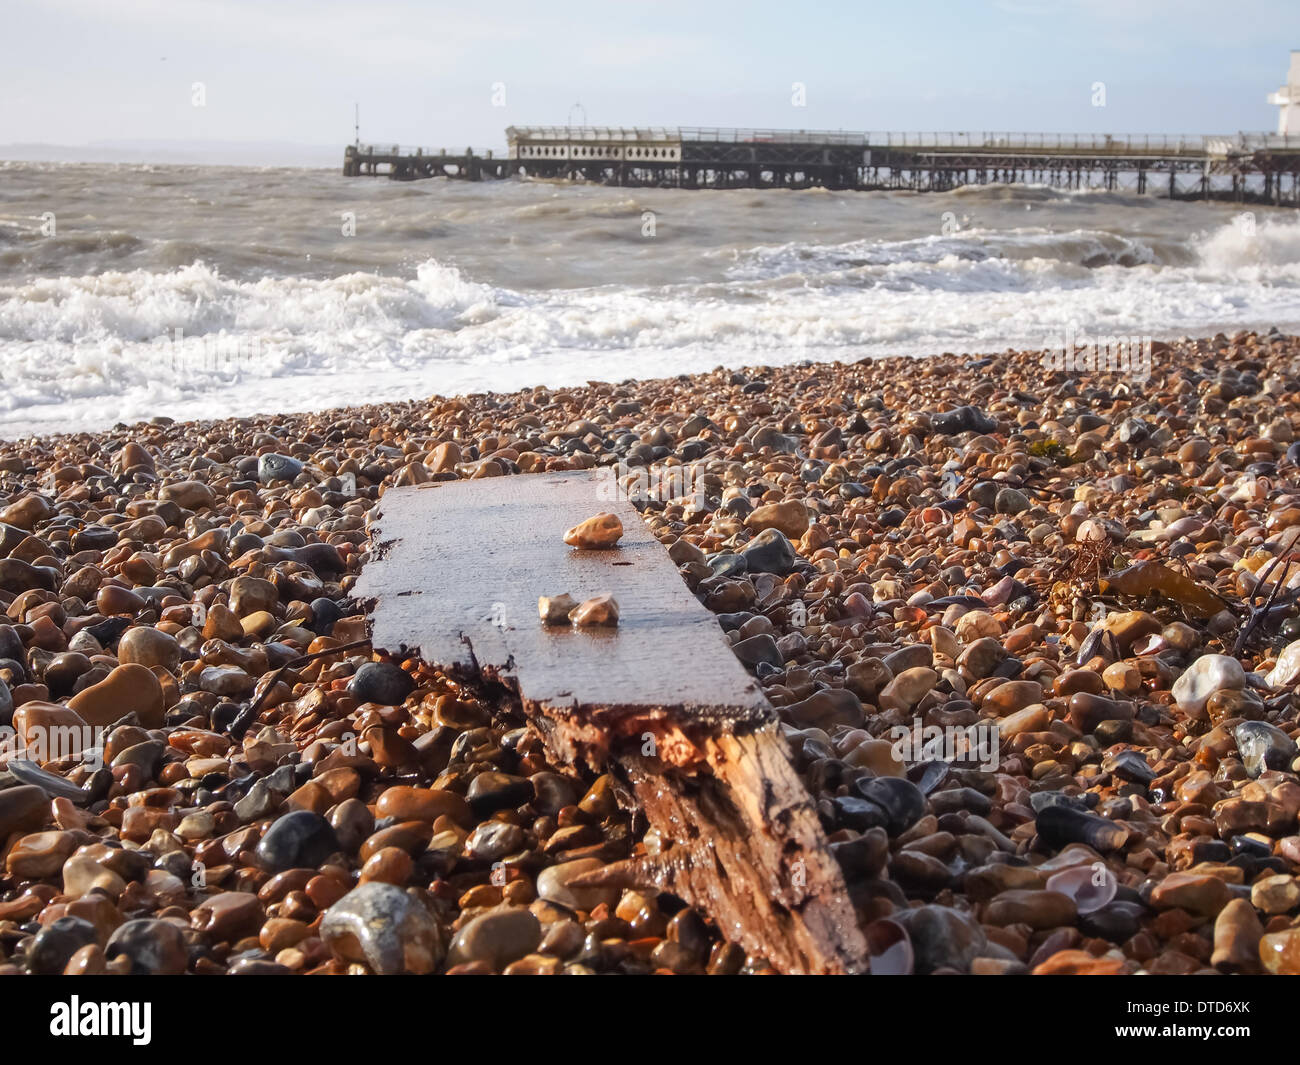 Portsmouth, Hampshire, England 15th February 2014Wood from the Damaged south Parade Pier lies along the beach after high winds and strong tides battered the pier overnight causing further structural damage. the pier has been closed to the public due to structural safety issues for over a year Credit:  simon evans/Alamy Live News Stock Photo